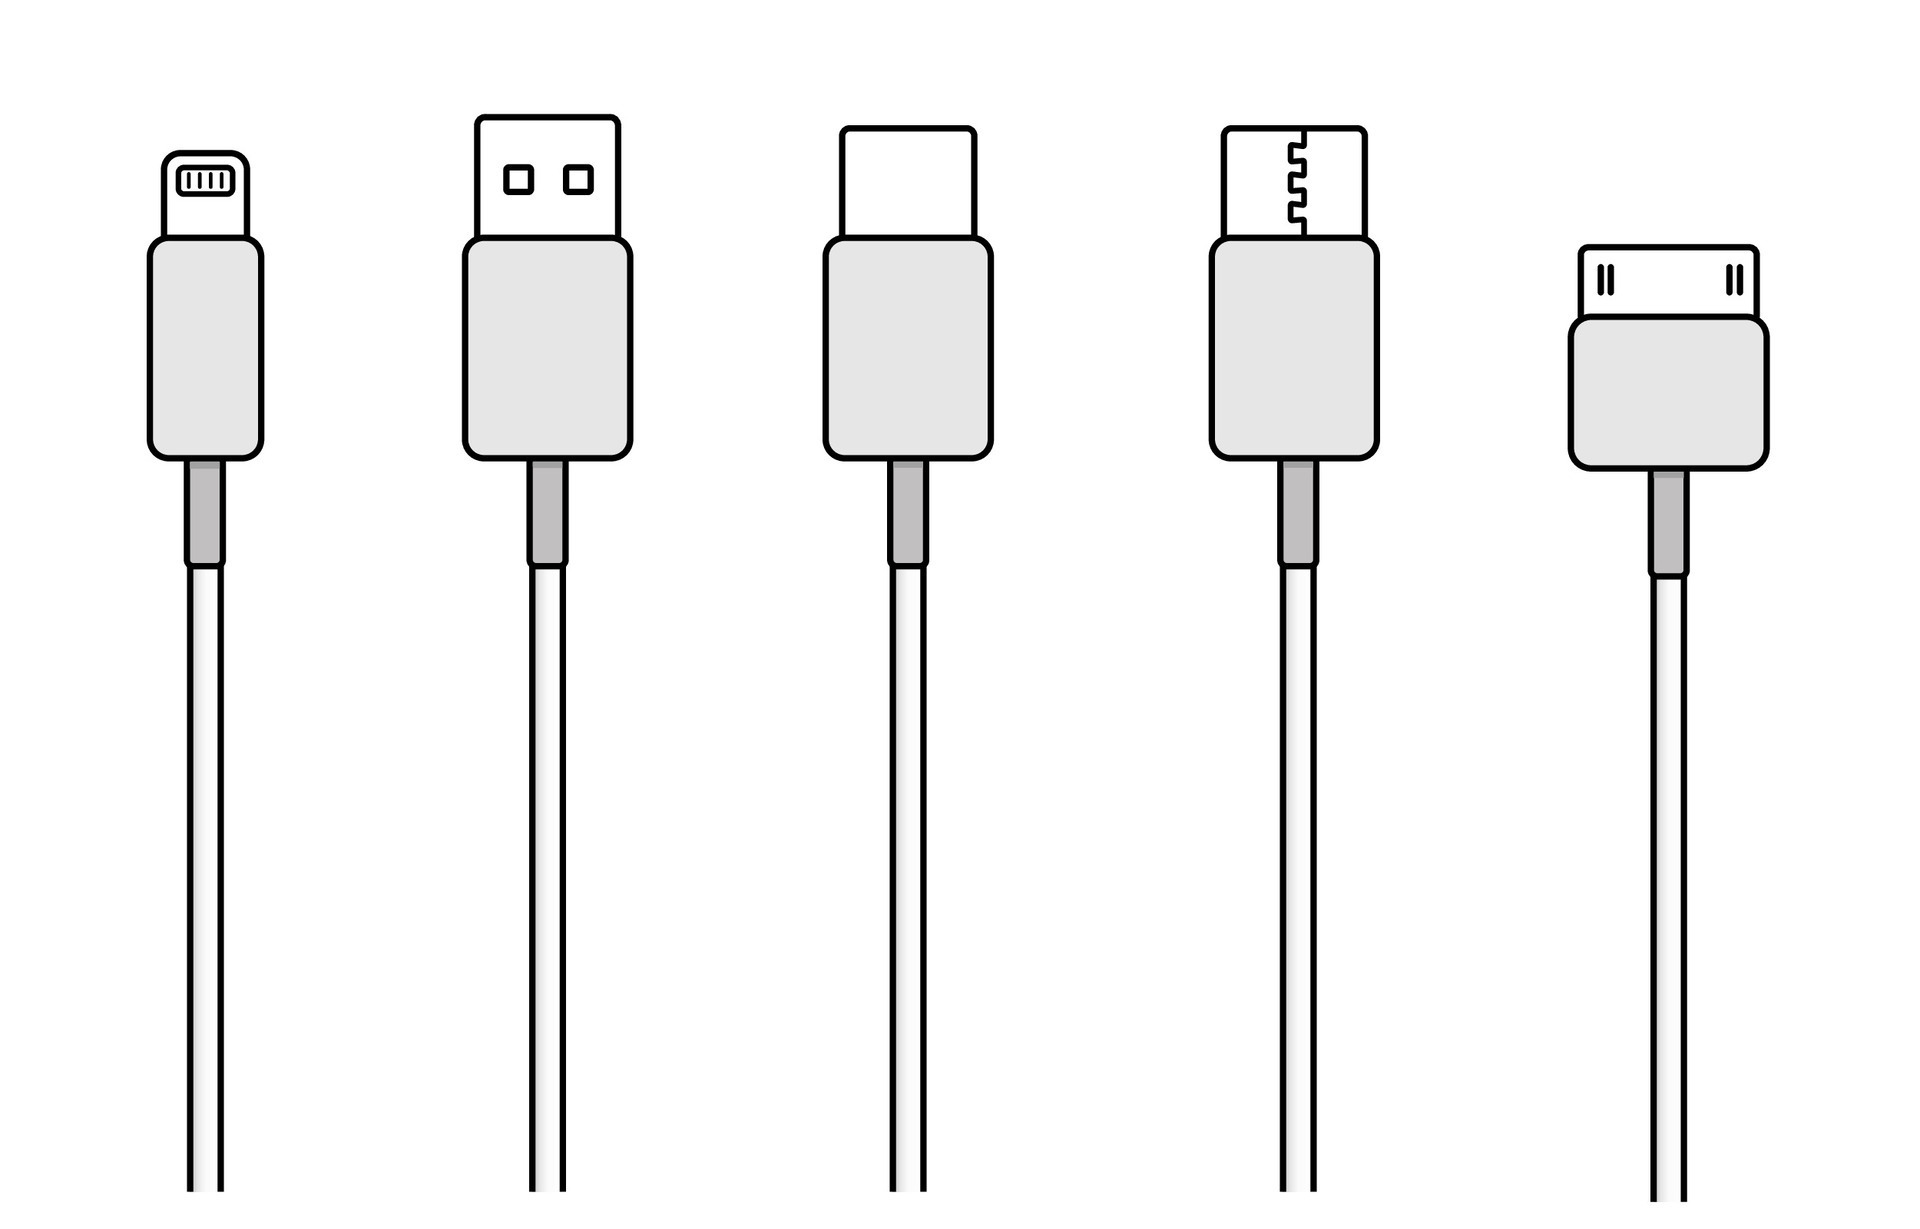 Cable Apple USB a Lightning - iCon